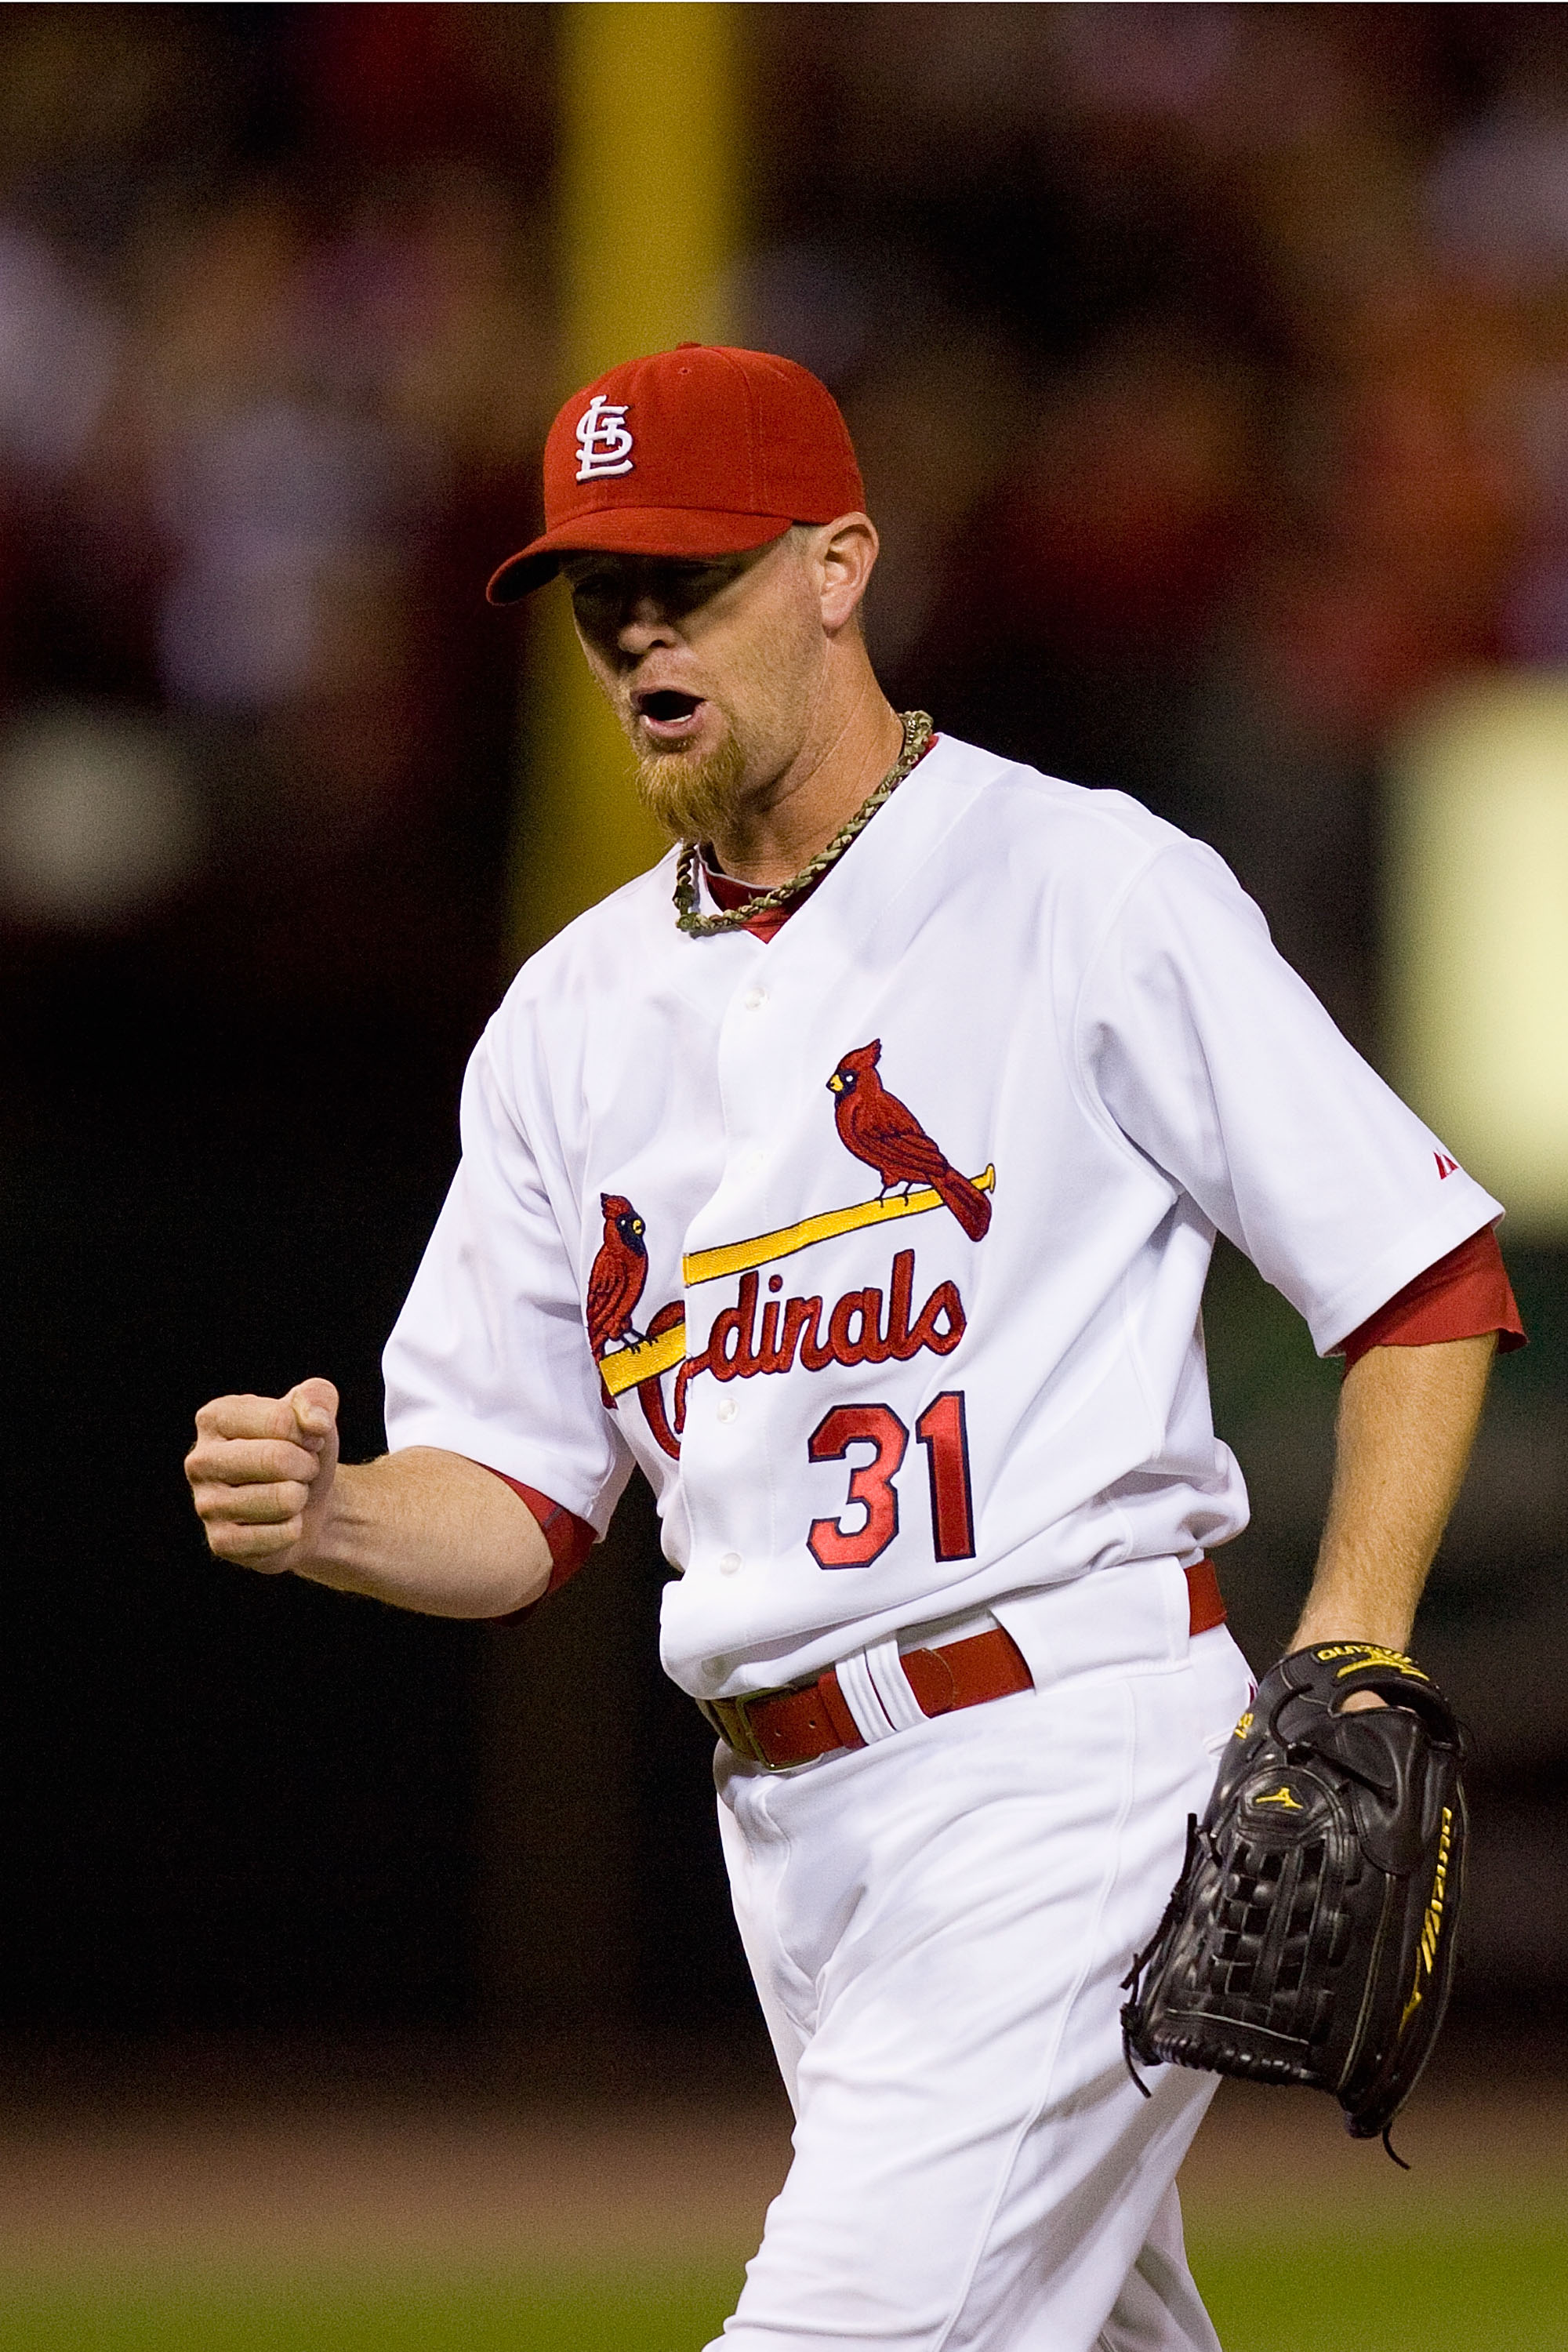 ST. LOUIS - SEPTEMBER 3: Reliever Ryan Franklin #31 of the St. Louis Cardinals celebrates beating the Cincinnati Reds at Busch Stadium on September 3, 2010 in St. Louis, Missouri.  The Cardinals beat the Reds 3-2.  (Photo by Dilip Vishwanat/Getty Images)